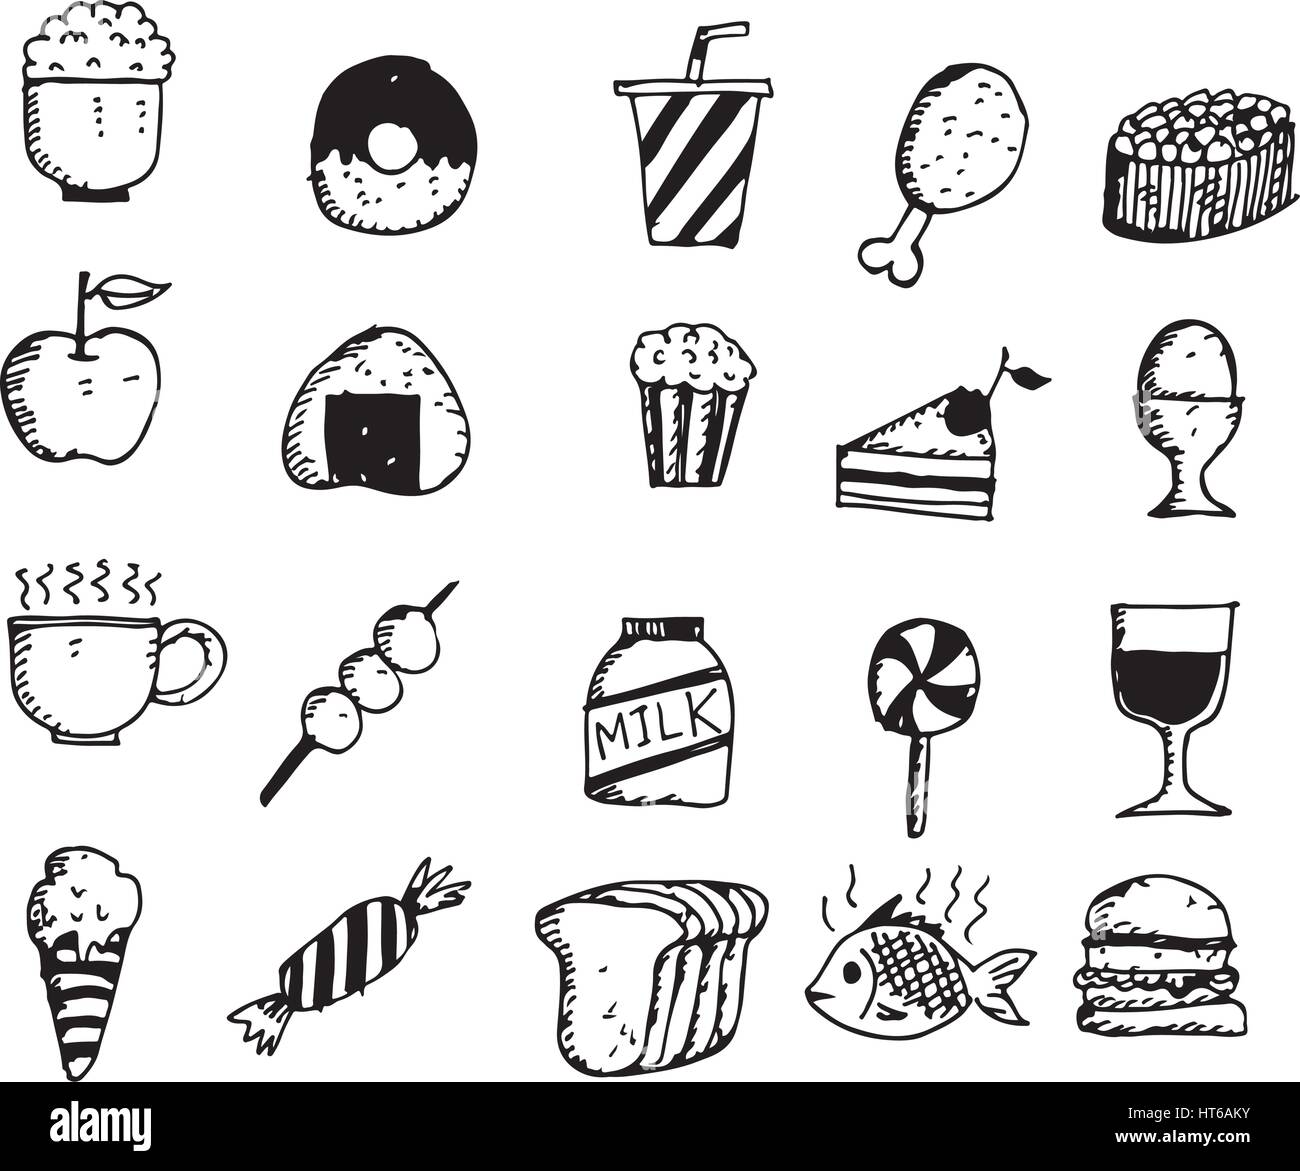 Hand draw food icon illustration doodle design Stock Vector